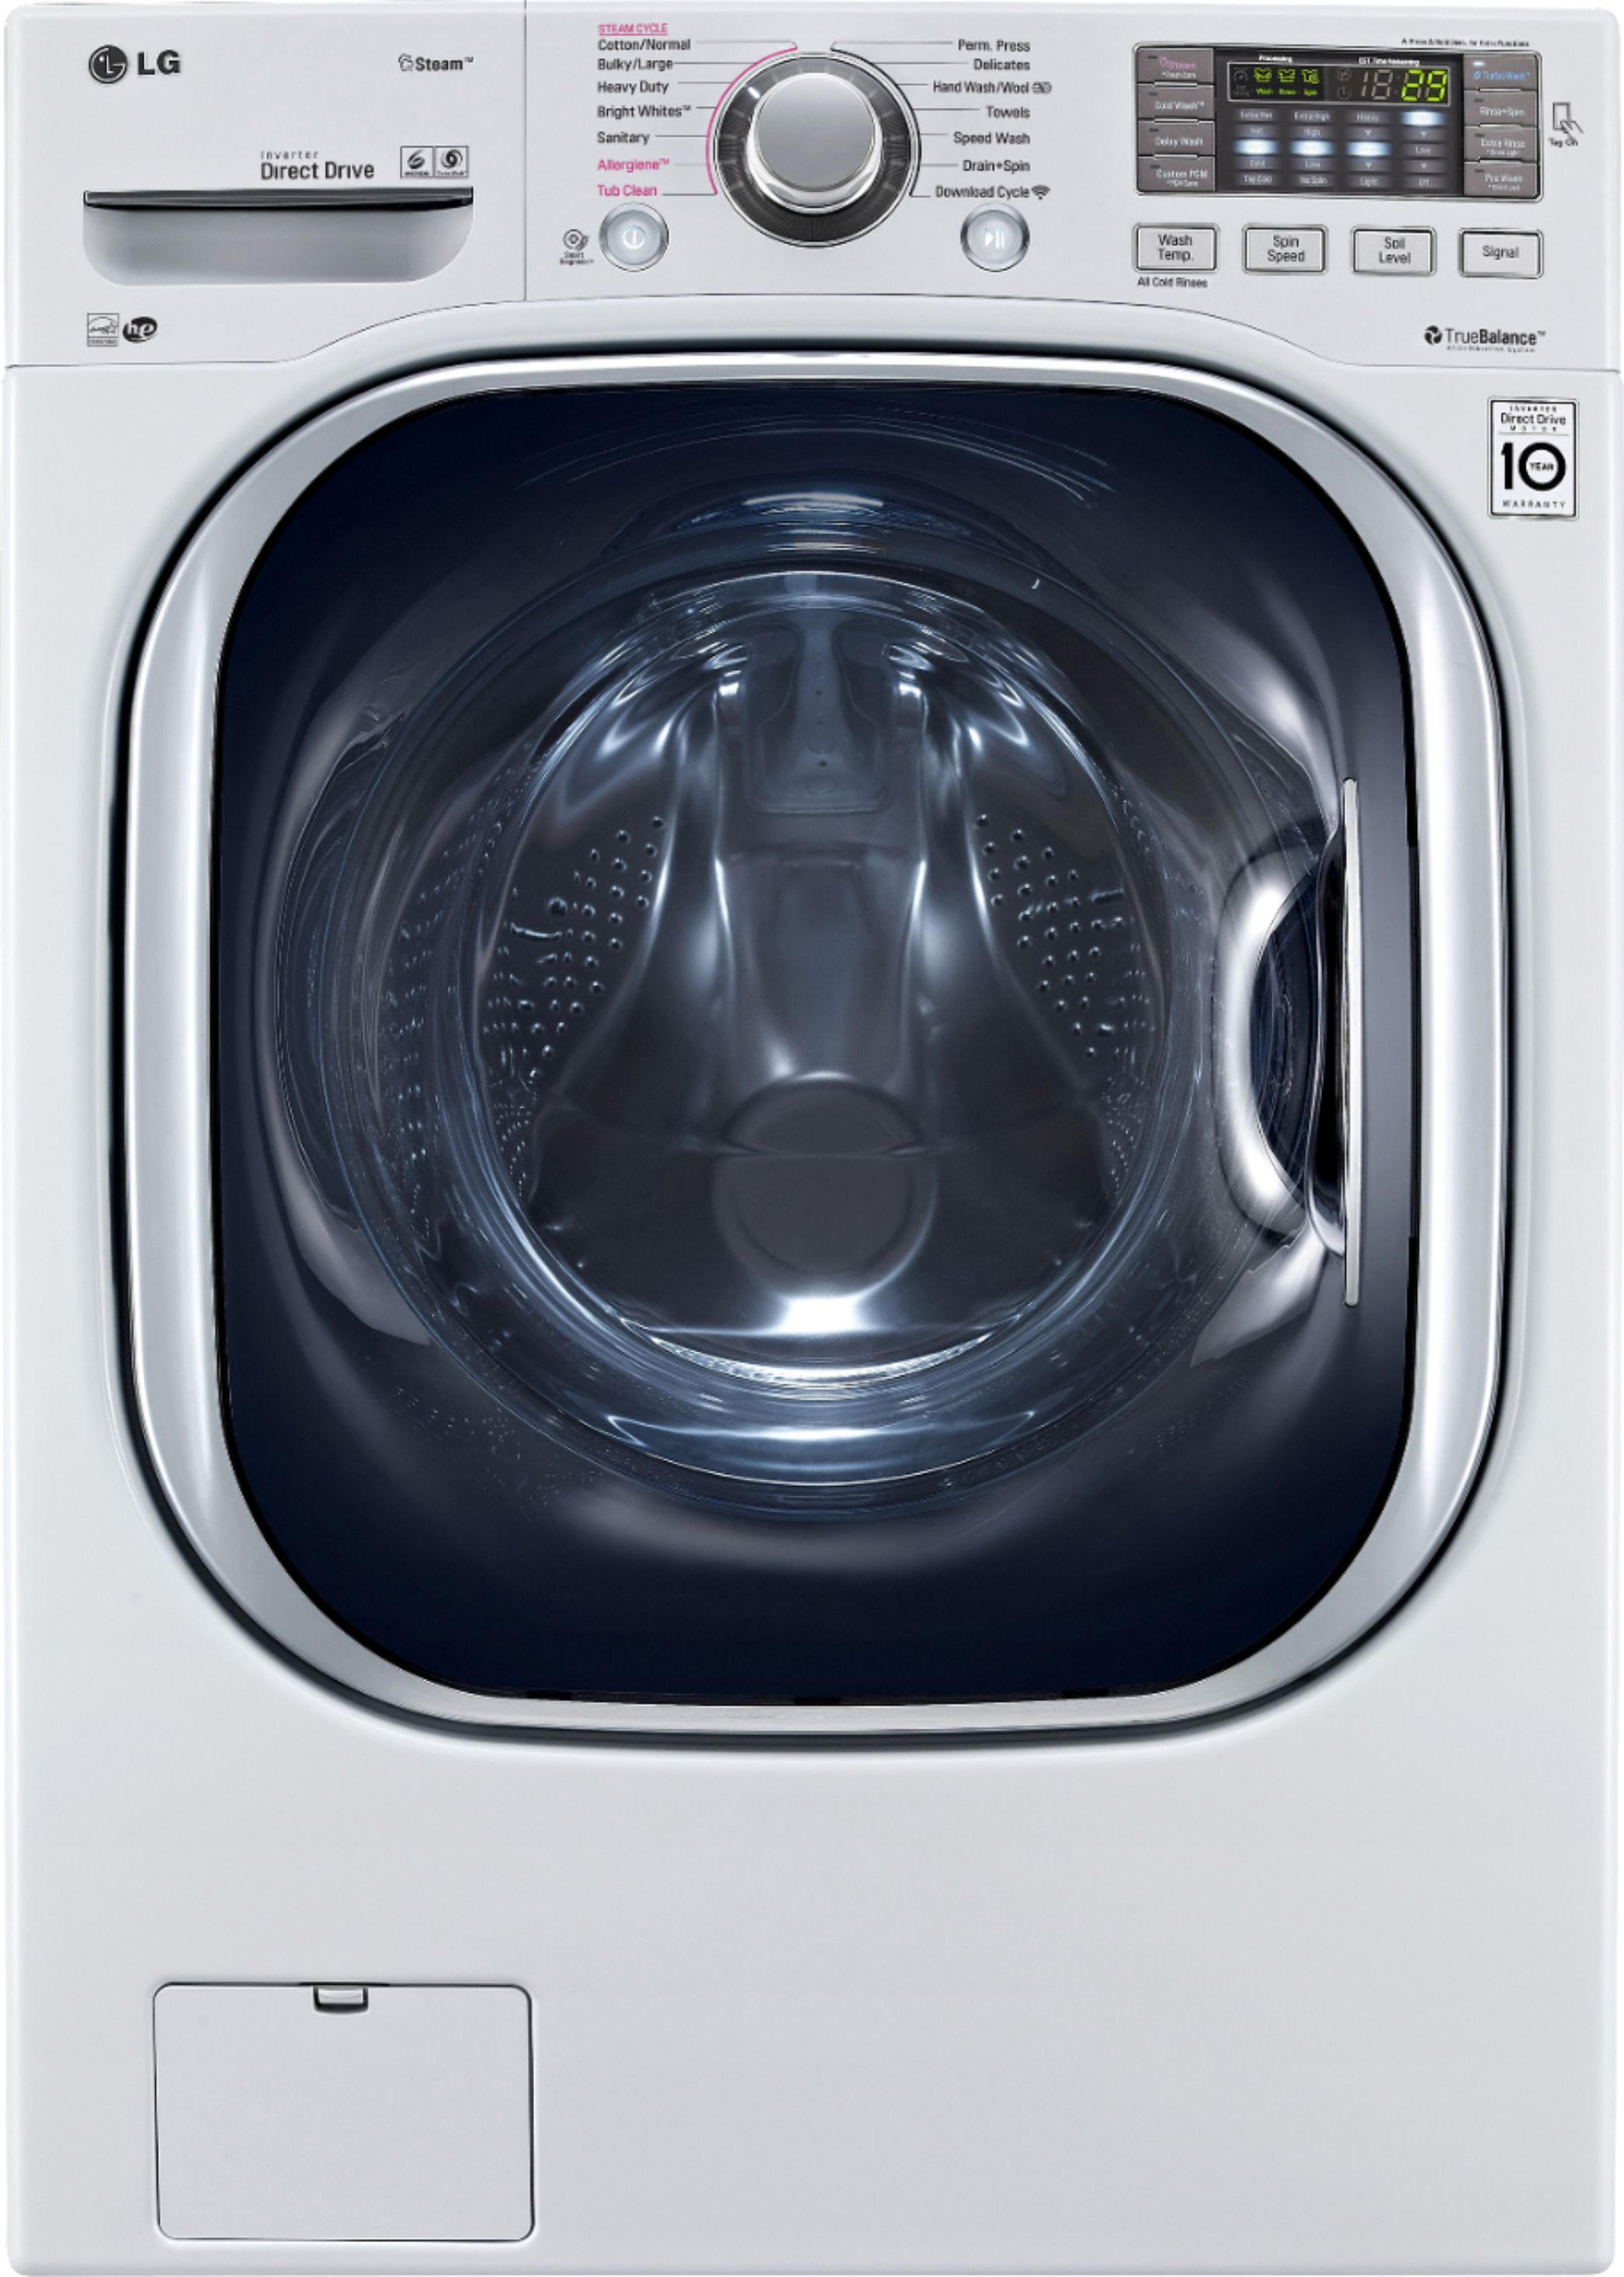 Customer Reviews Lg 4 5 Cu Ft 14 Cycle Front Loading Washer With Steam White Wm4370hwa Best Buy